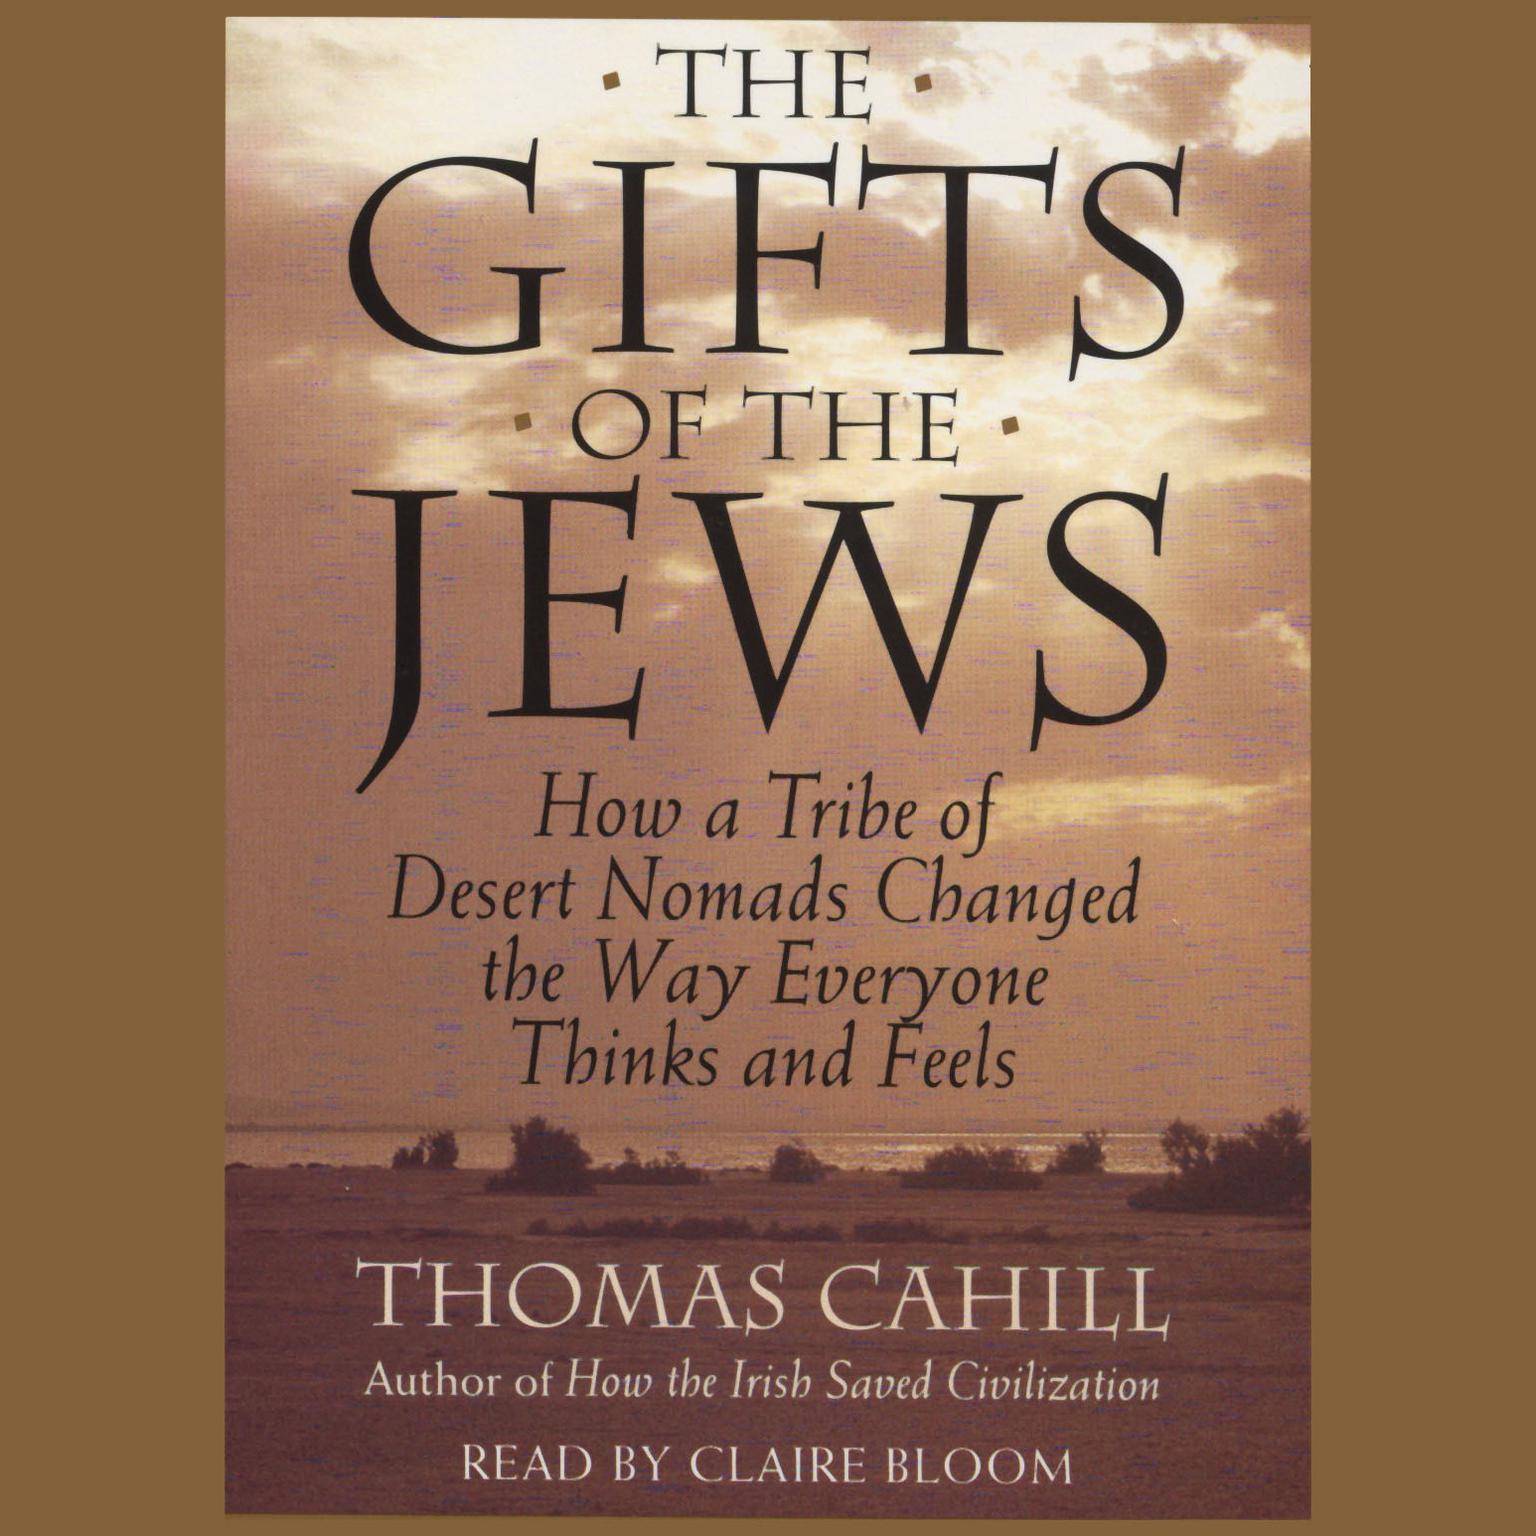 The Gifts Of The Jews (Abridged): How A Tribe of Desert Nomads Changed the Way Everyone Thinks and Feels Audiobook, by Thomas Cahill